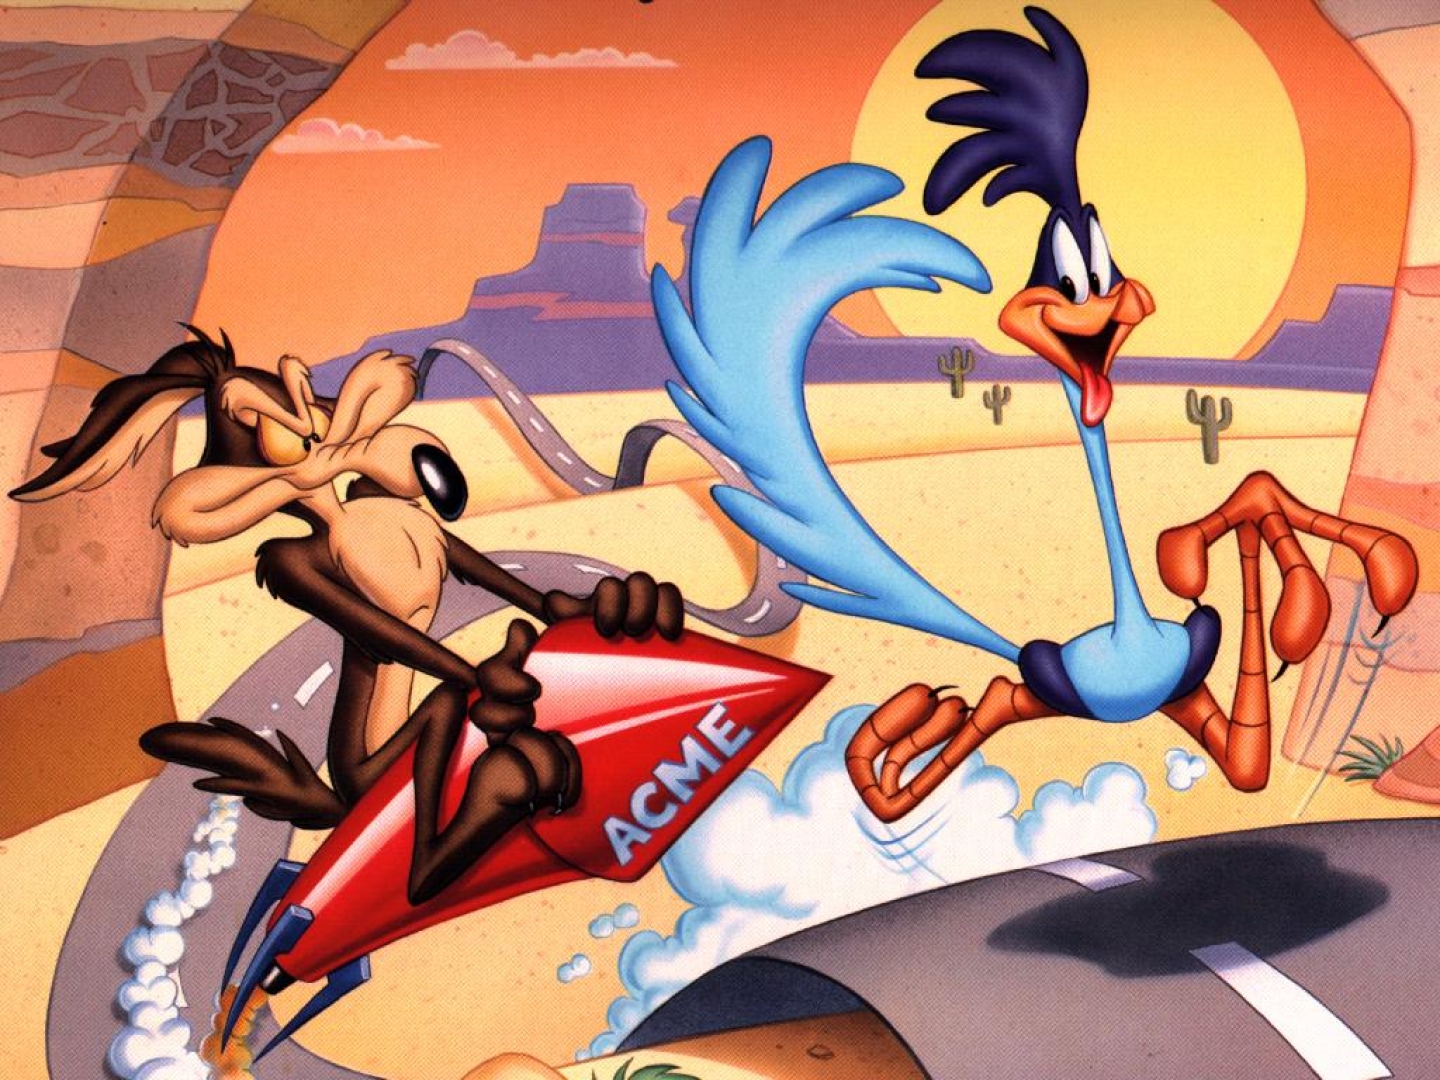 Wile E. Coyote and The Road Runner Images. 